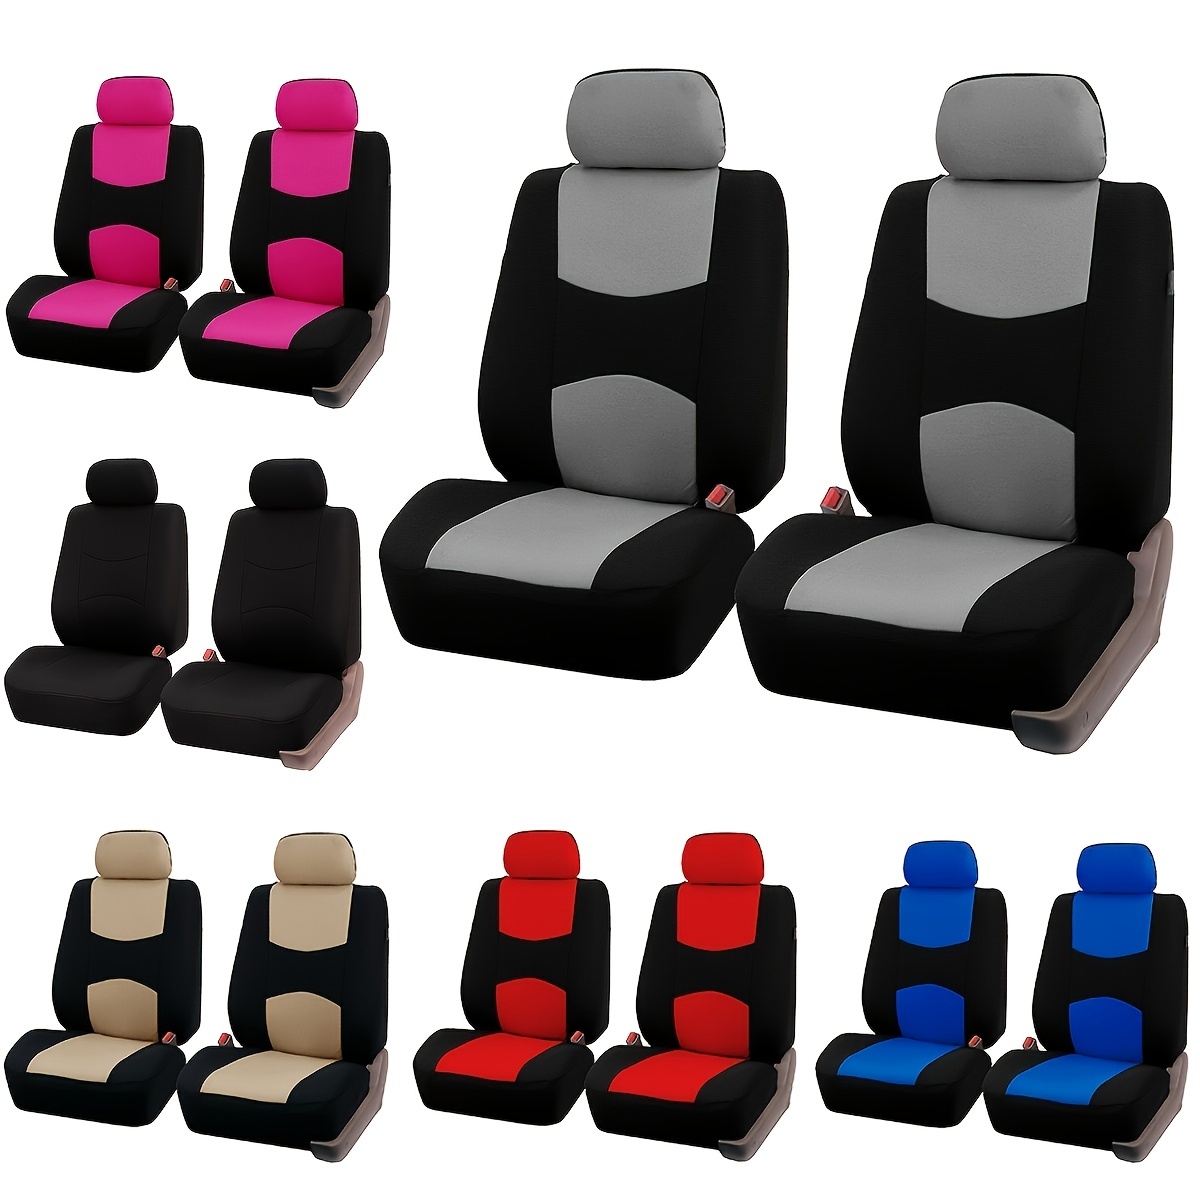 14 Pieces Sunflower Car Accessories Set for Seaters Cars with Sunflower  Seat Covers Steering Wheel Cover Front Seat Covers Rear Bench Seat 